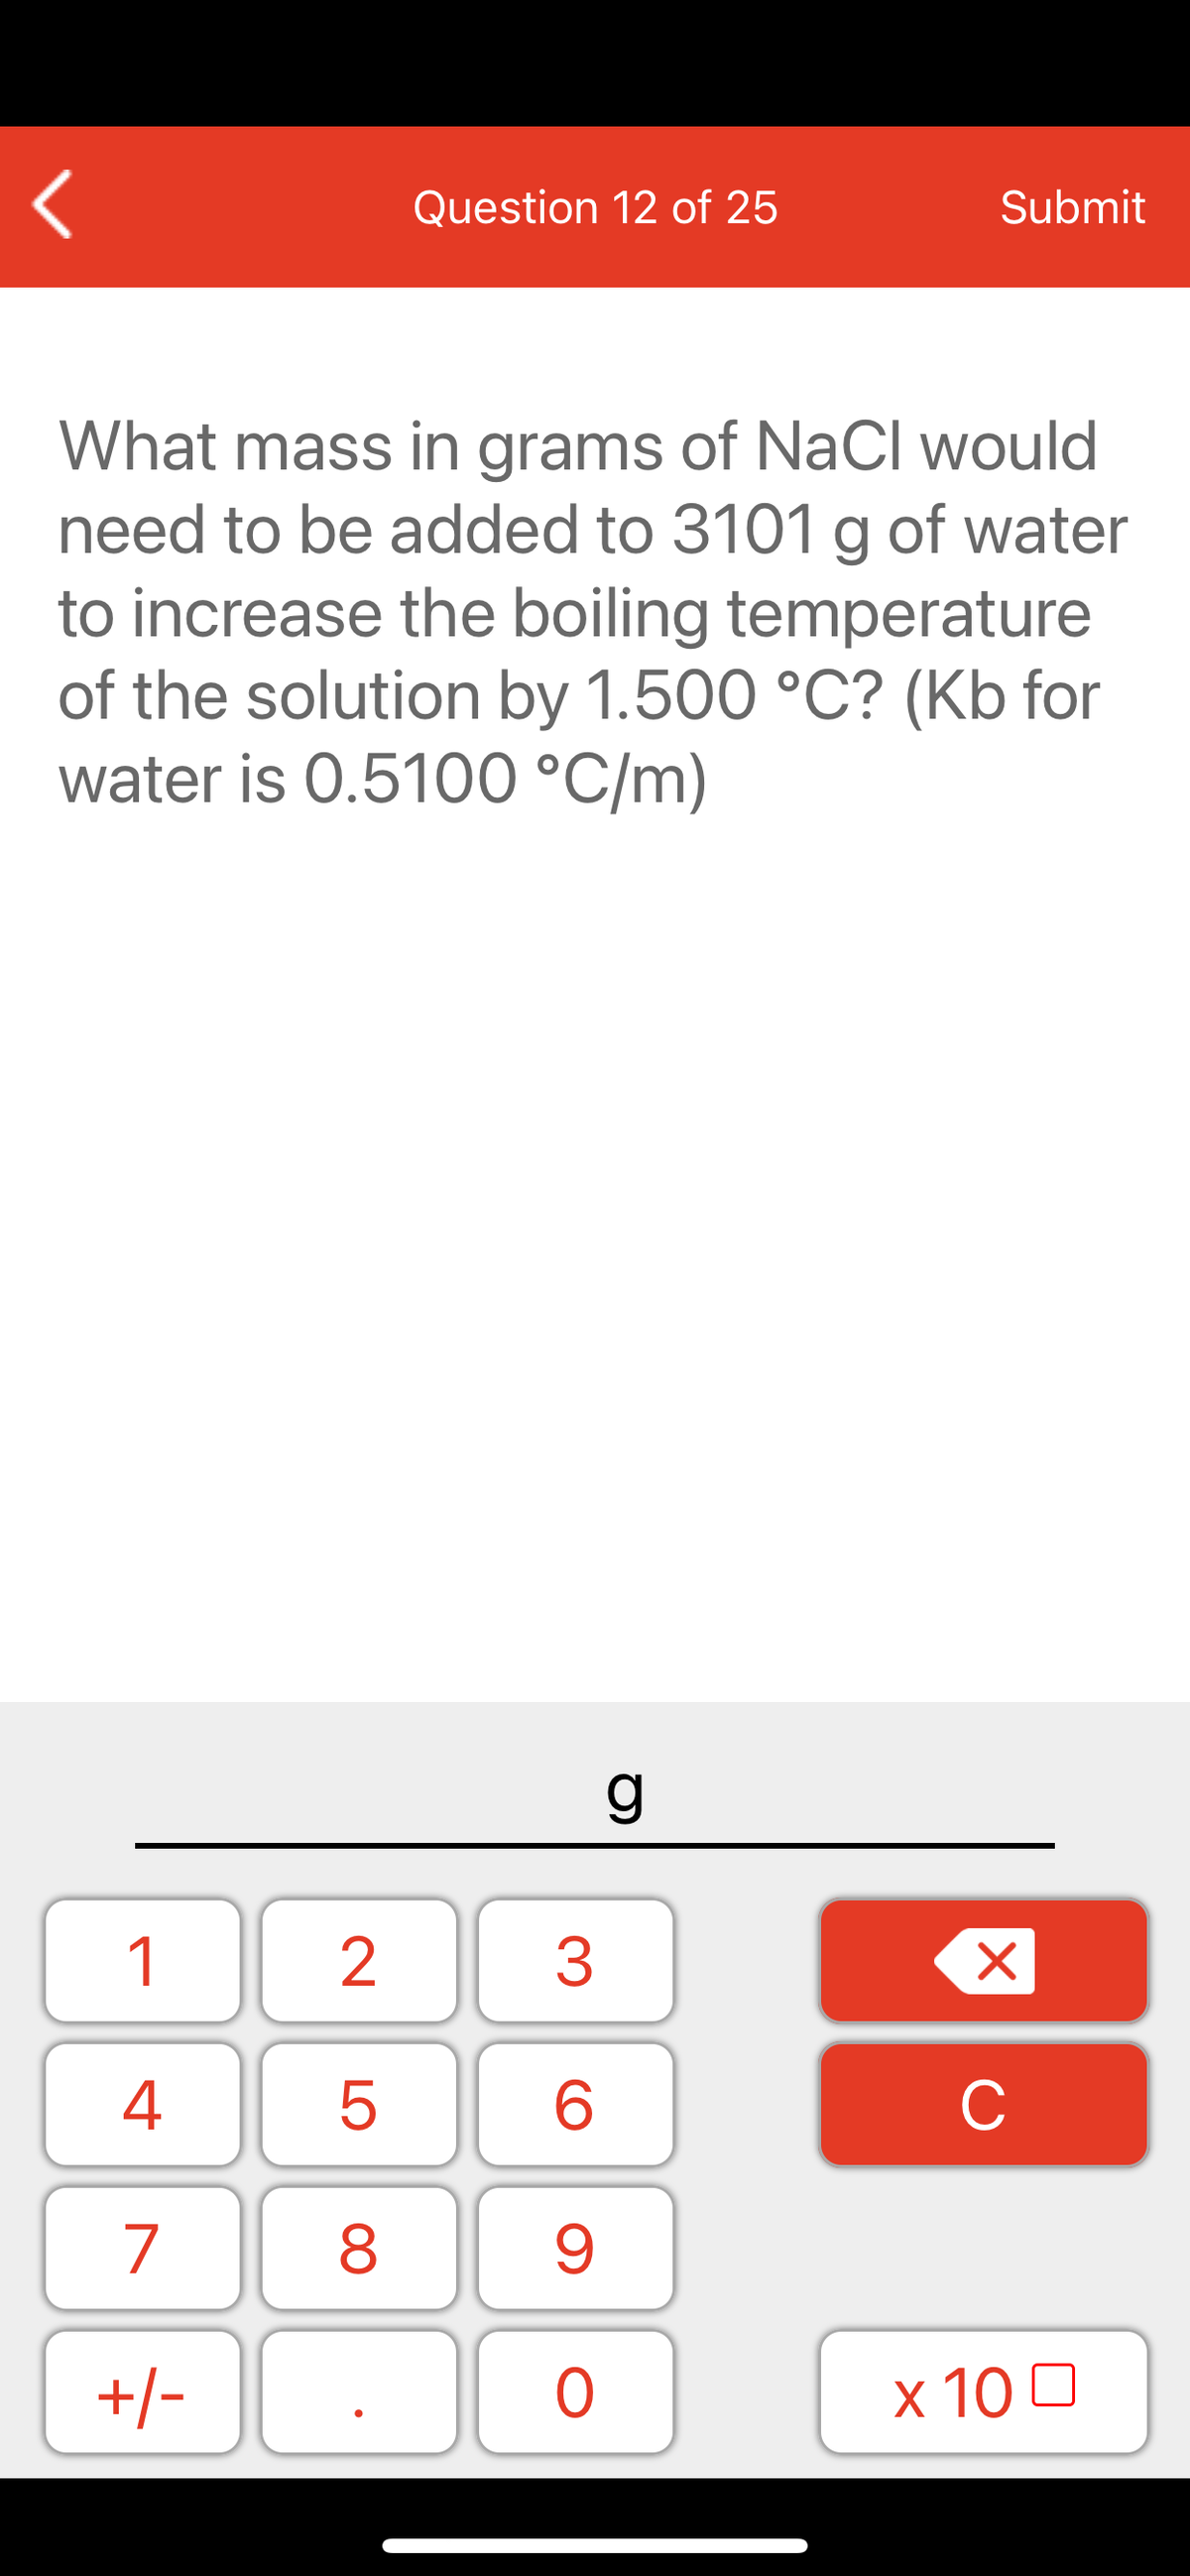 Question 12 of 25
Submit
What mass in grams of NaCl would
need to be added to 3101 g of water
to increase the boiling temperature
of the solution by 1.500 °C? (Kb for
water is 0.5100 °C/m)
1
2
3
C
7
9.
+/-
x 10 0
LO
00
